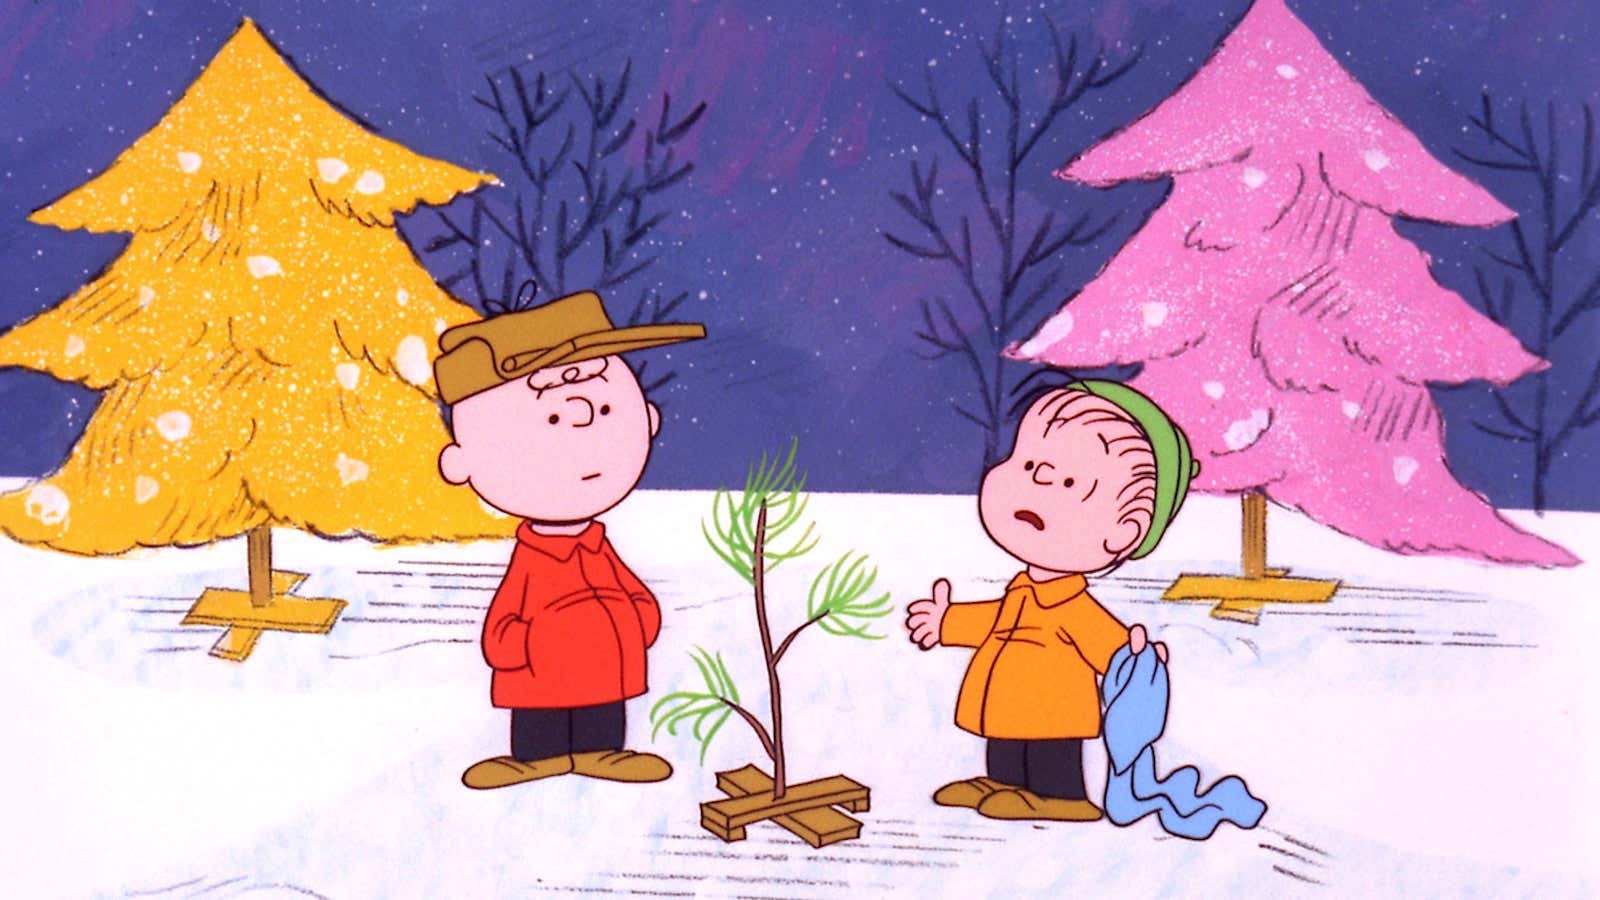 The year of the Charlie Brown Christmas tree.